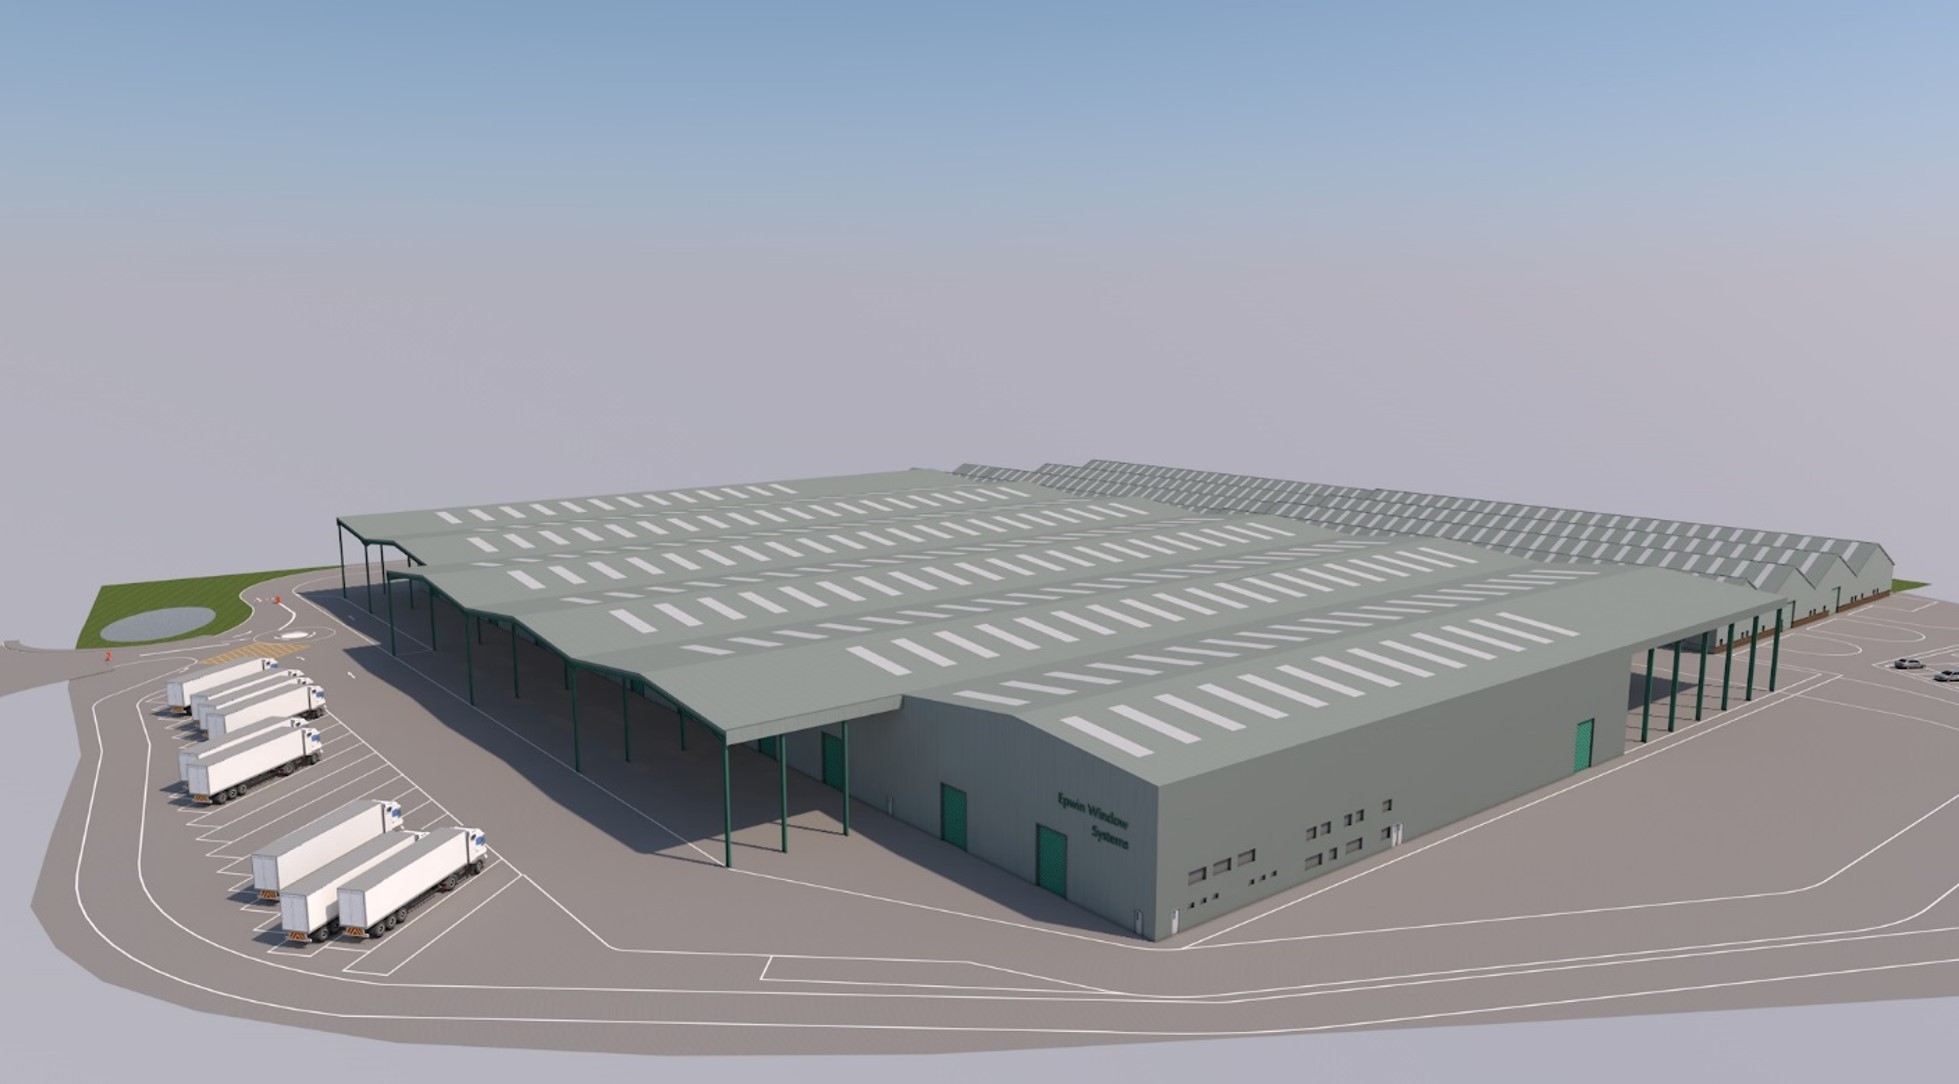 Epwin Window Systems announces investment in new 300,000 square foot warehouse and distribution centre in Telford